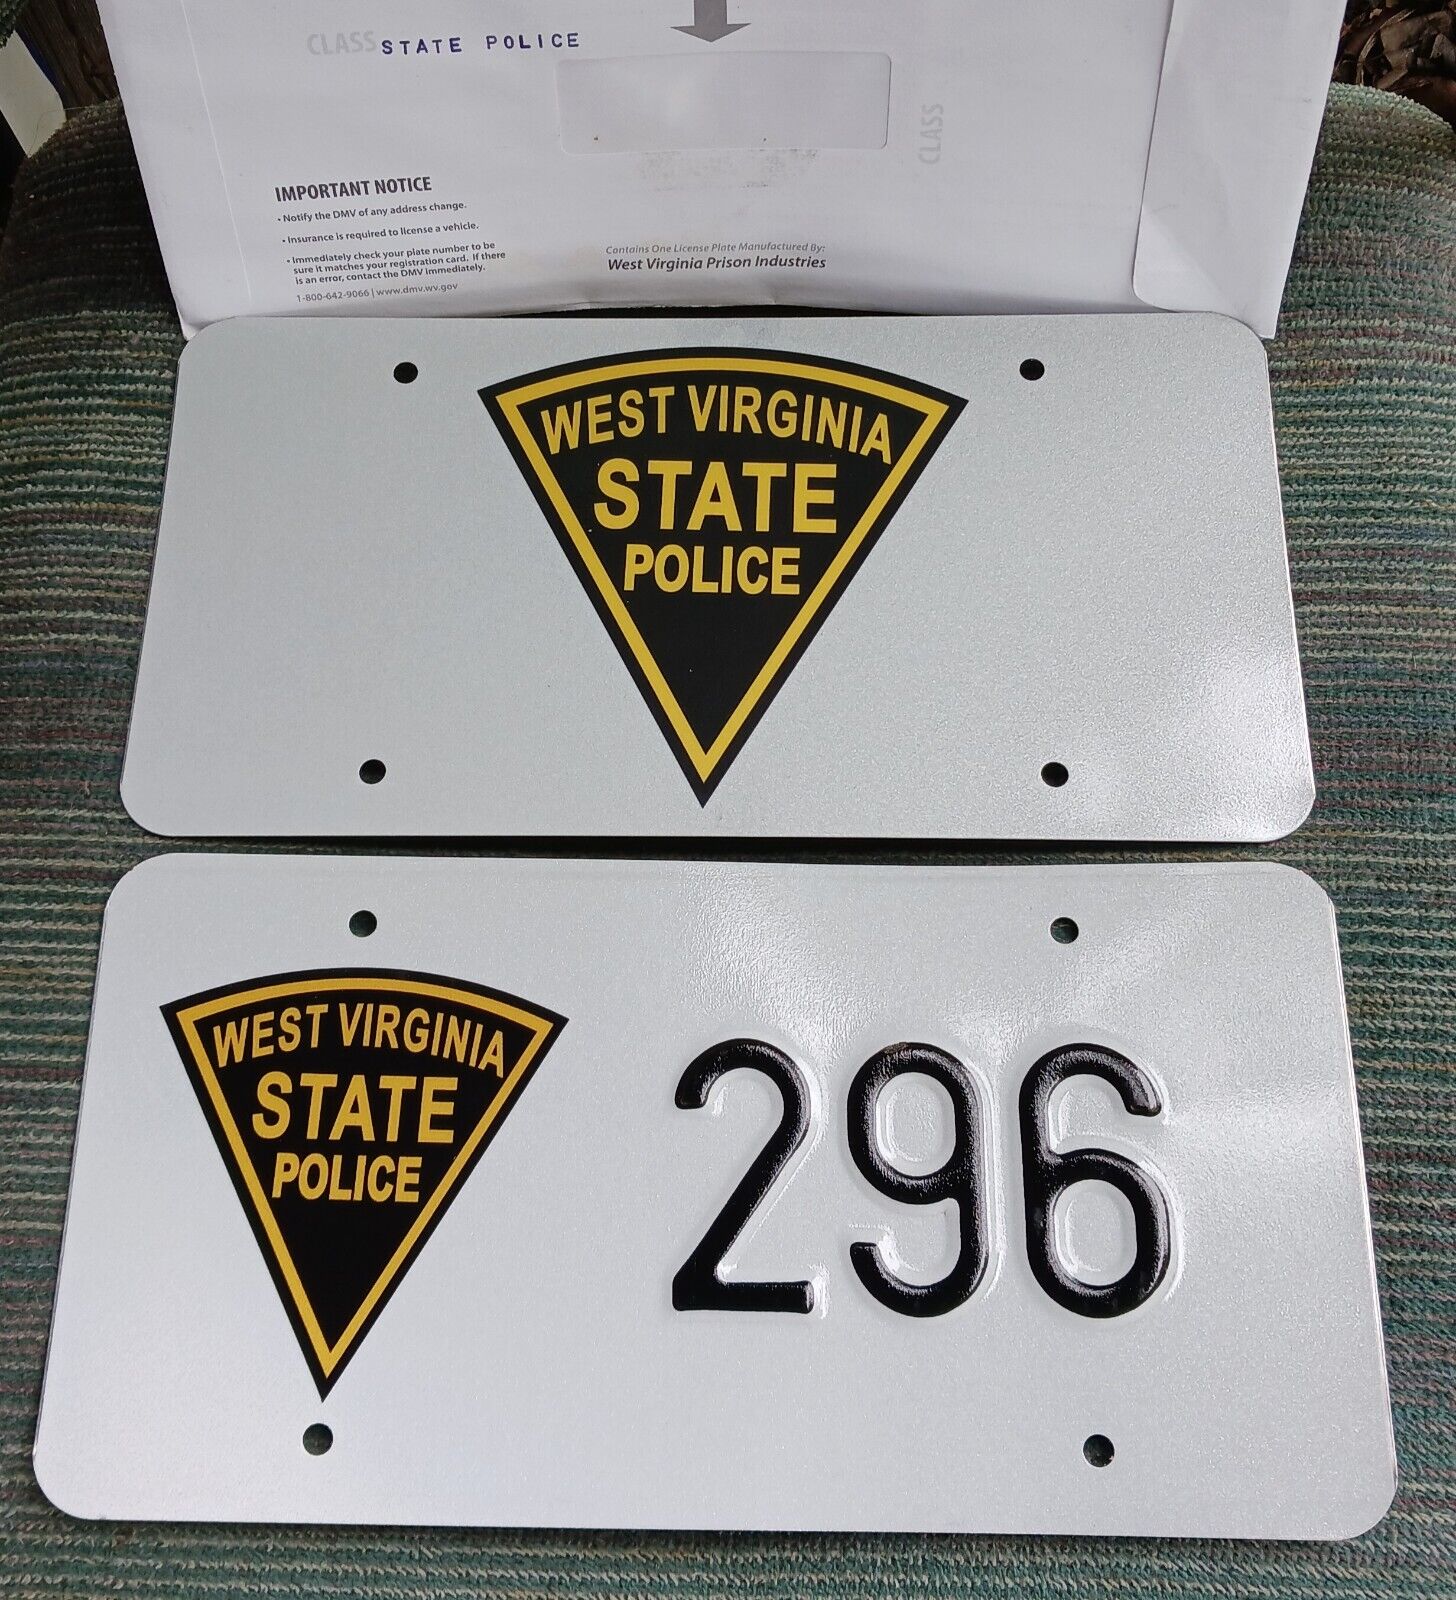 2006 WEST VIRGINIA STATE POLICE LICENSE PLATE SET/PAIR FRONT/BACK 296 NEAR MINT